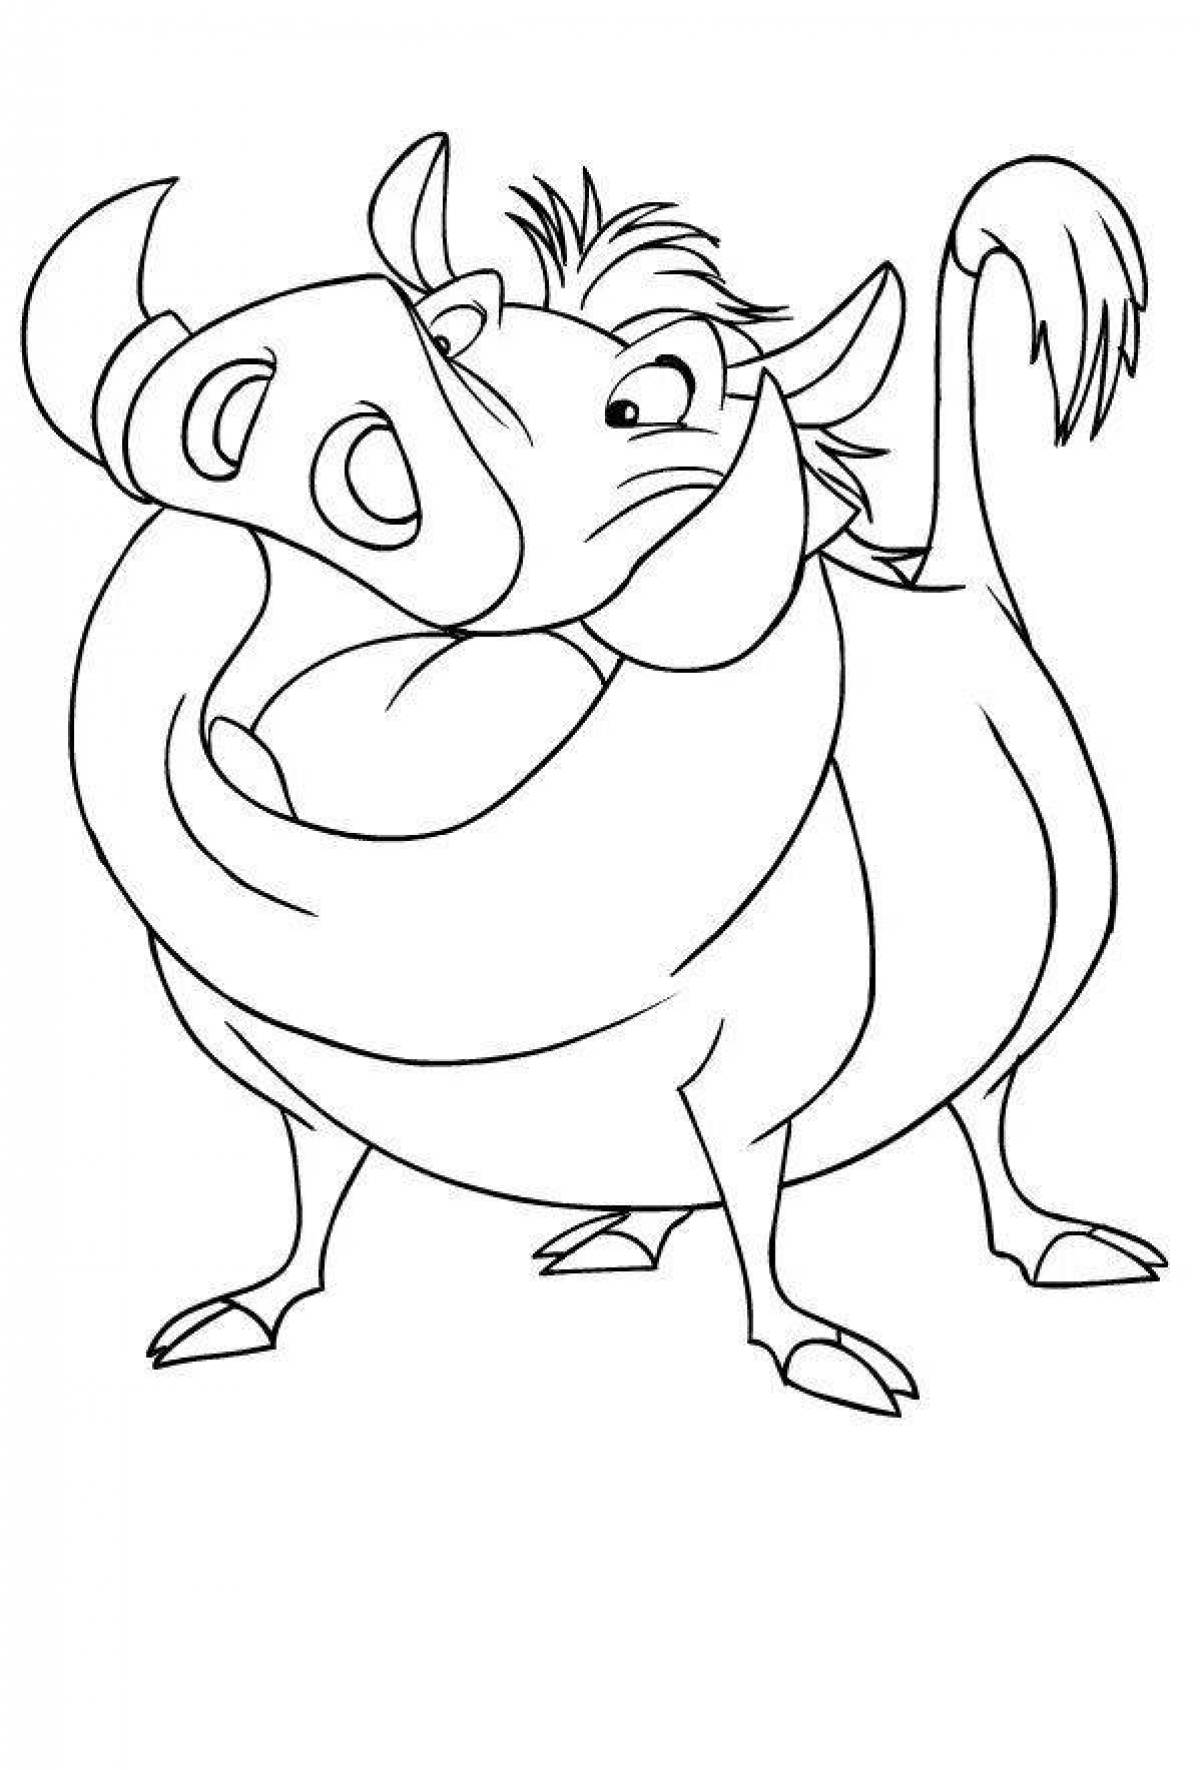 Timon and Pumbaa coloring pages